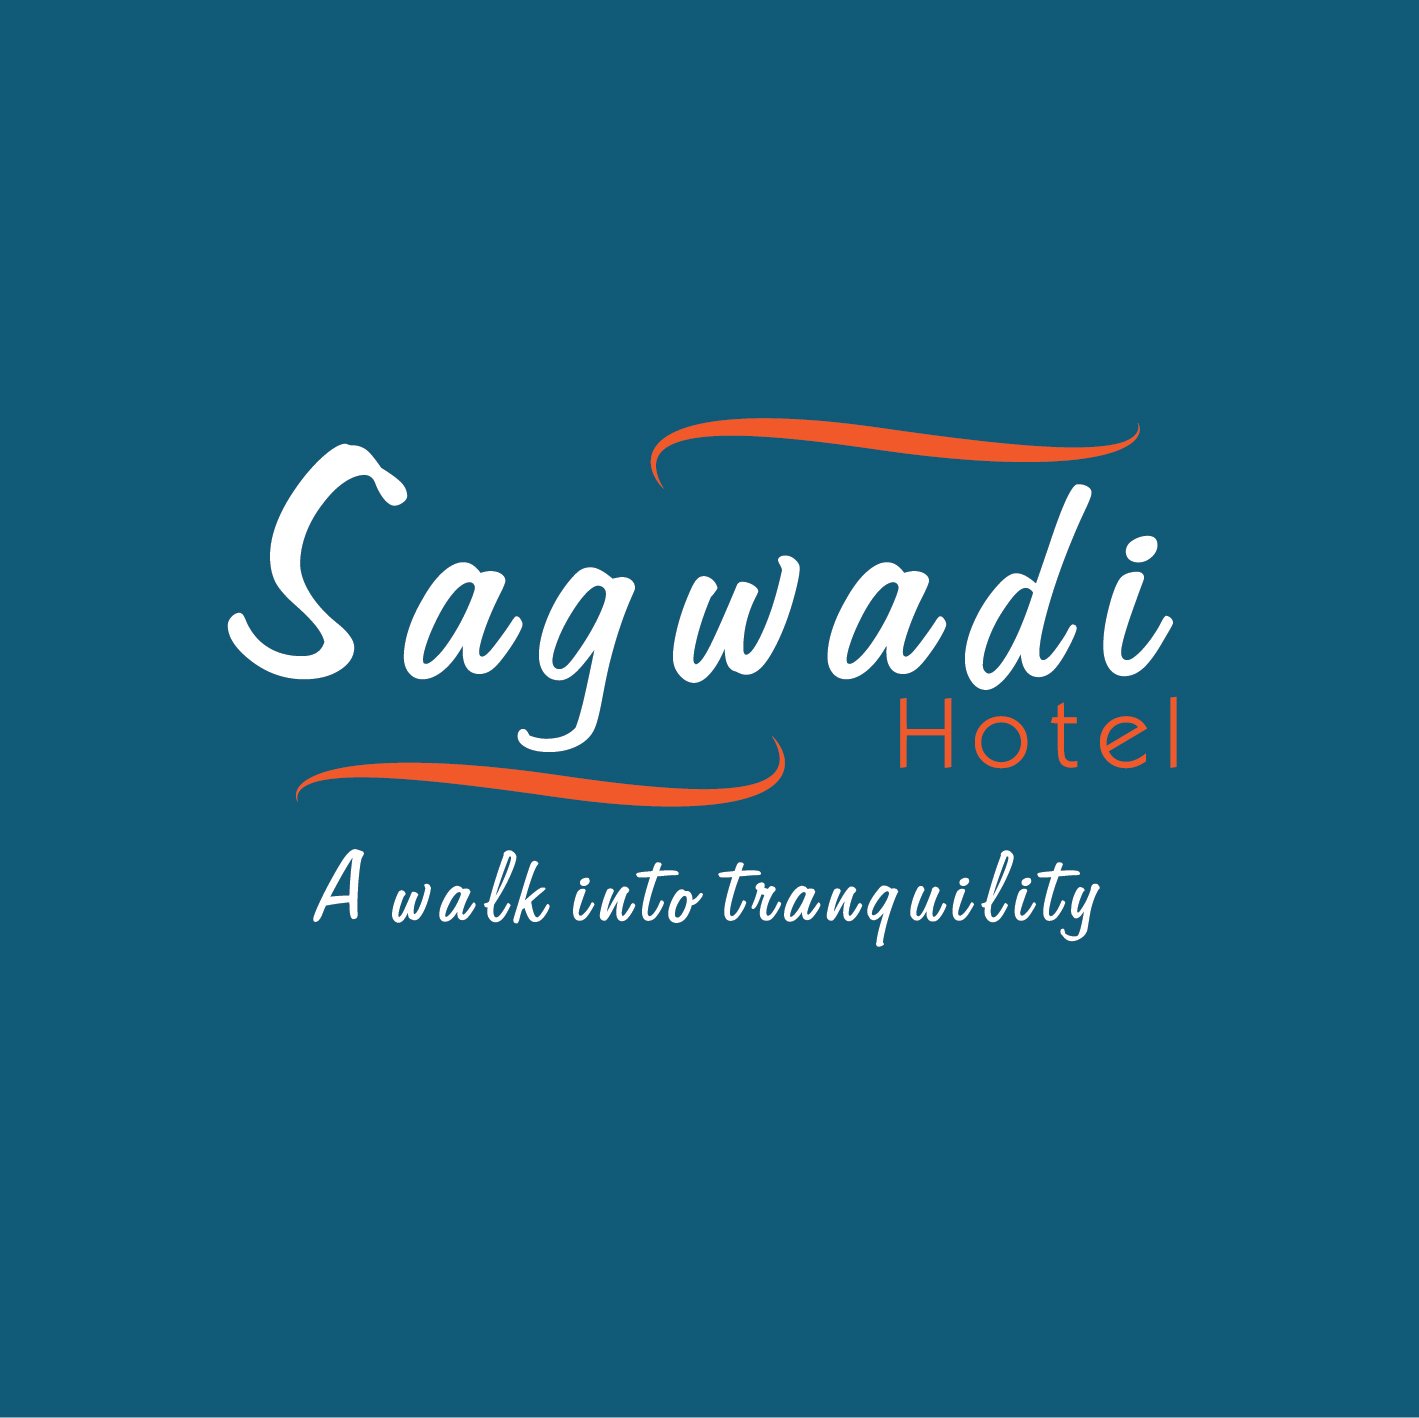 Sagwadi Hotel is an affordable and luxurious accommodation nestled amidst the lowveld, North Eastern side of Hazyview, Mpumalanga Province South Africa.